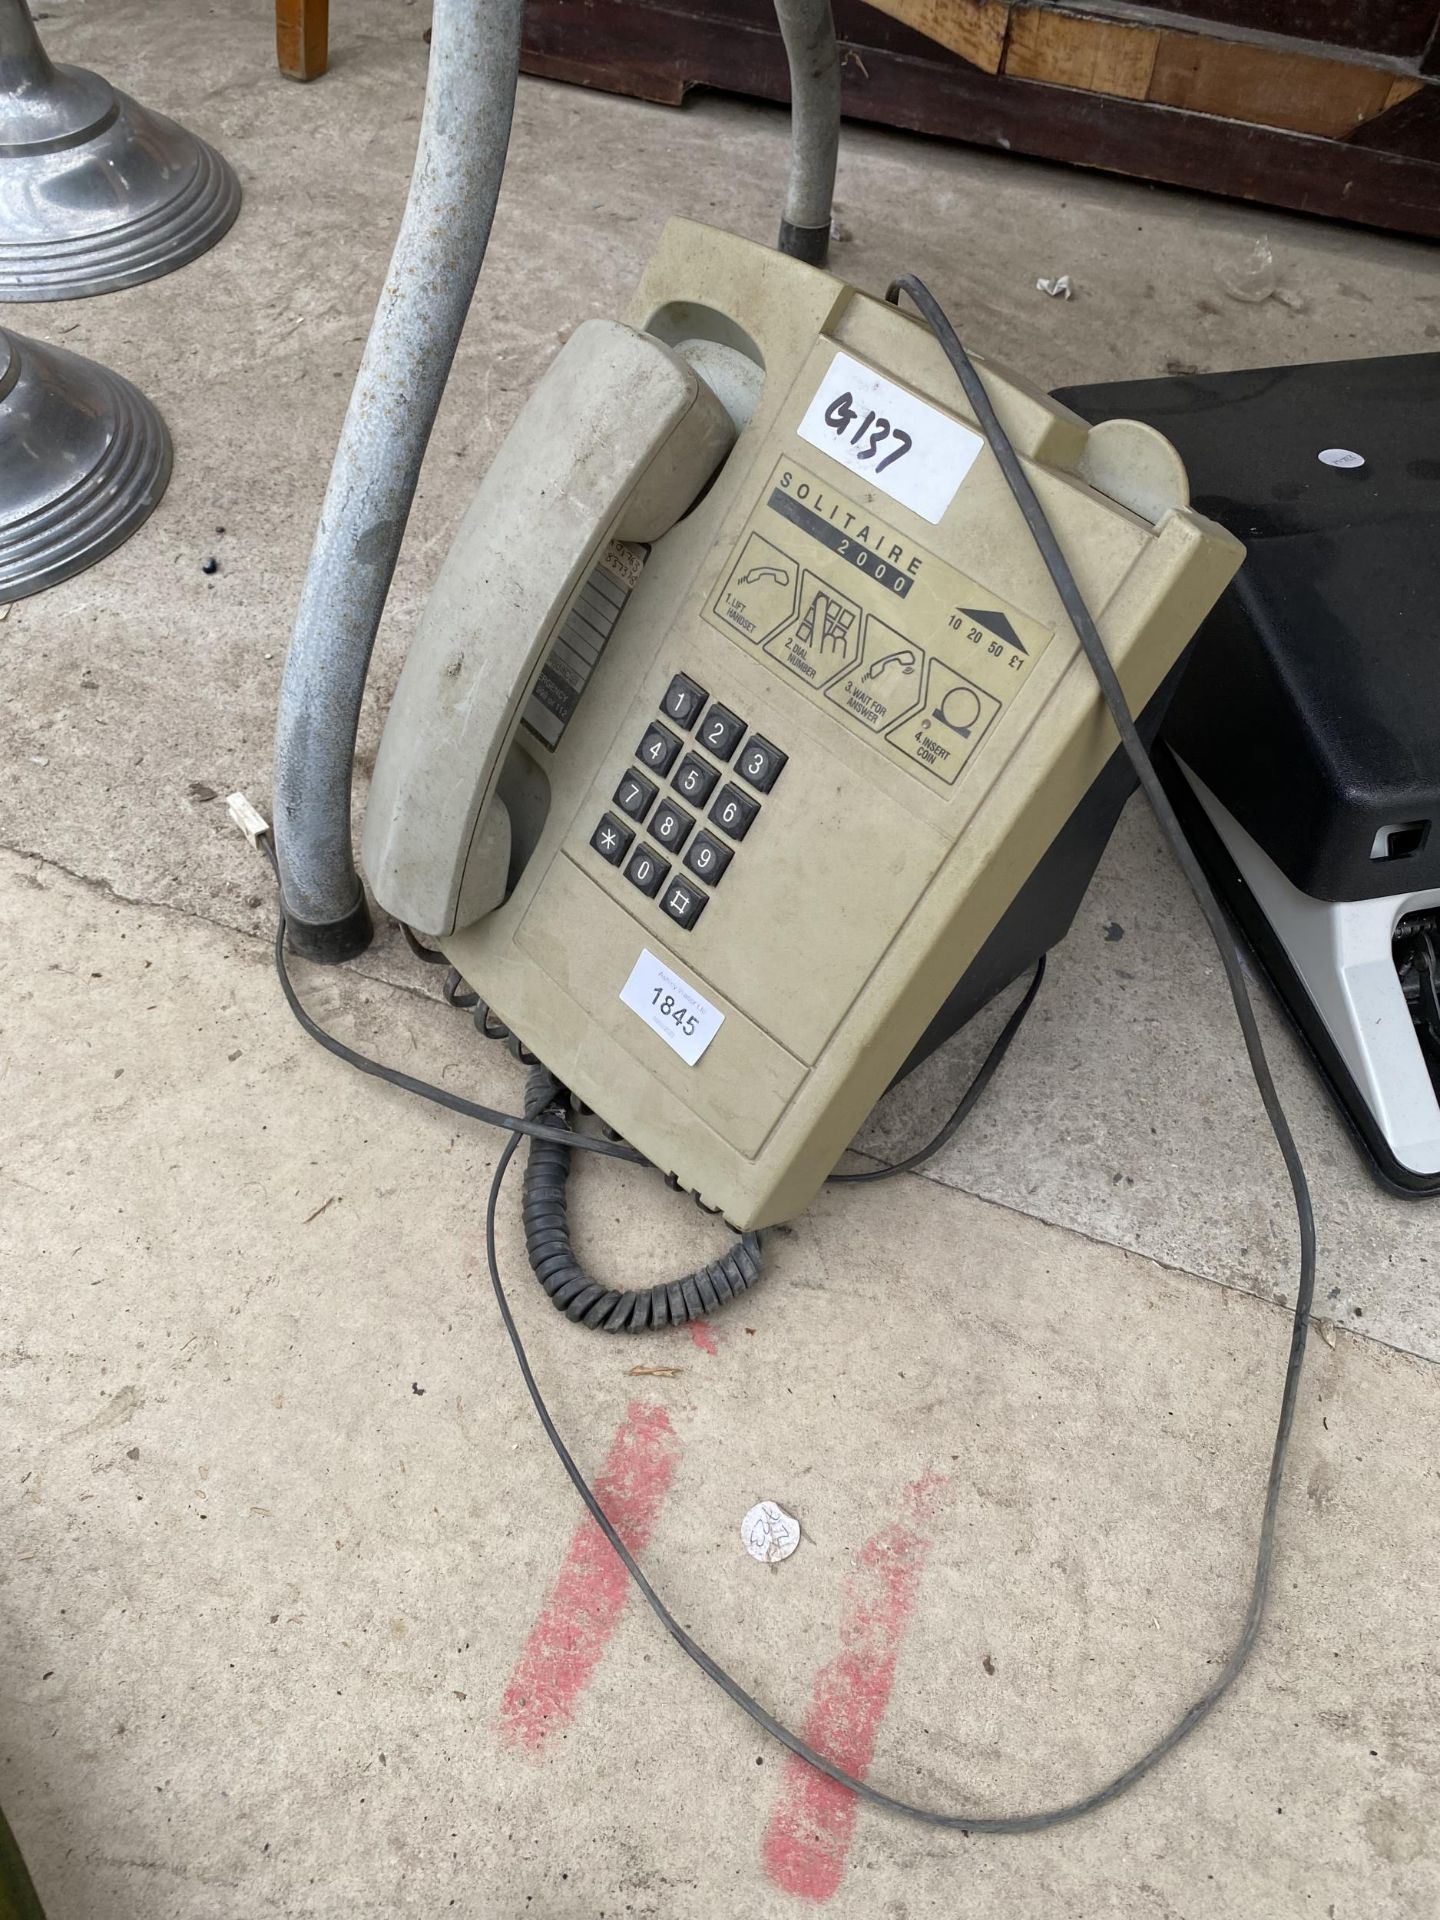 A SOLITAIRE 2000 PAY PHONE